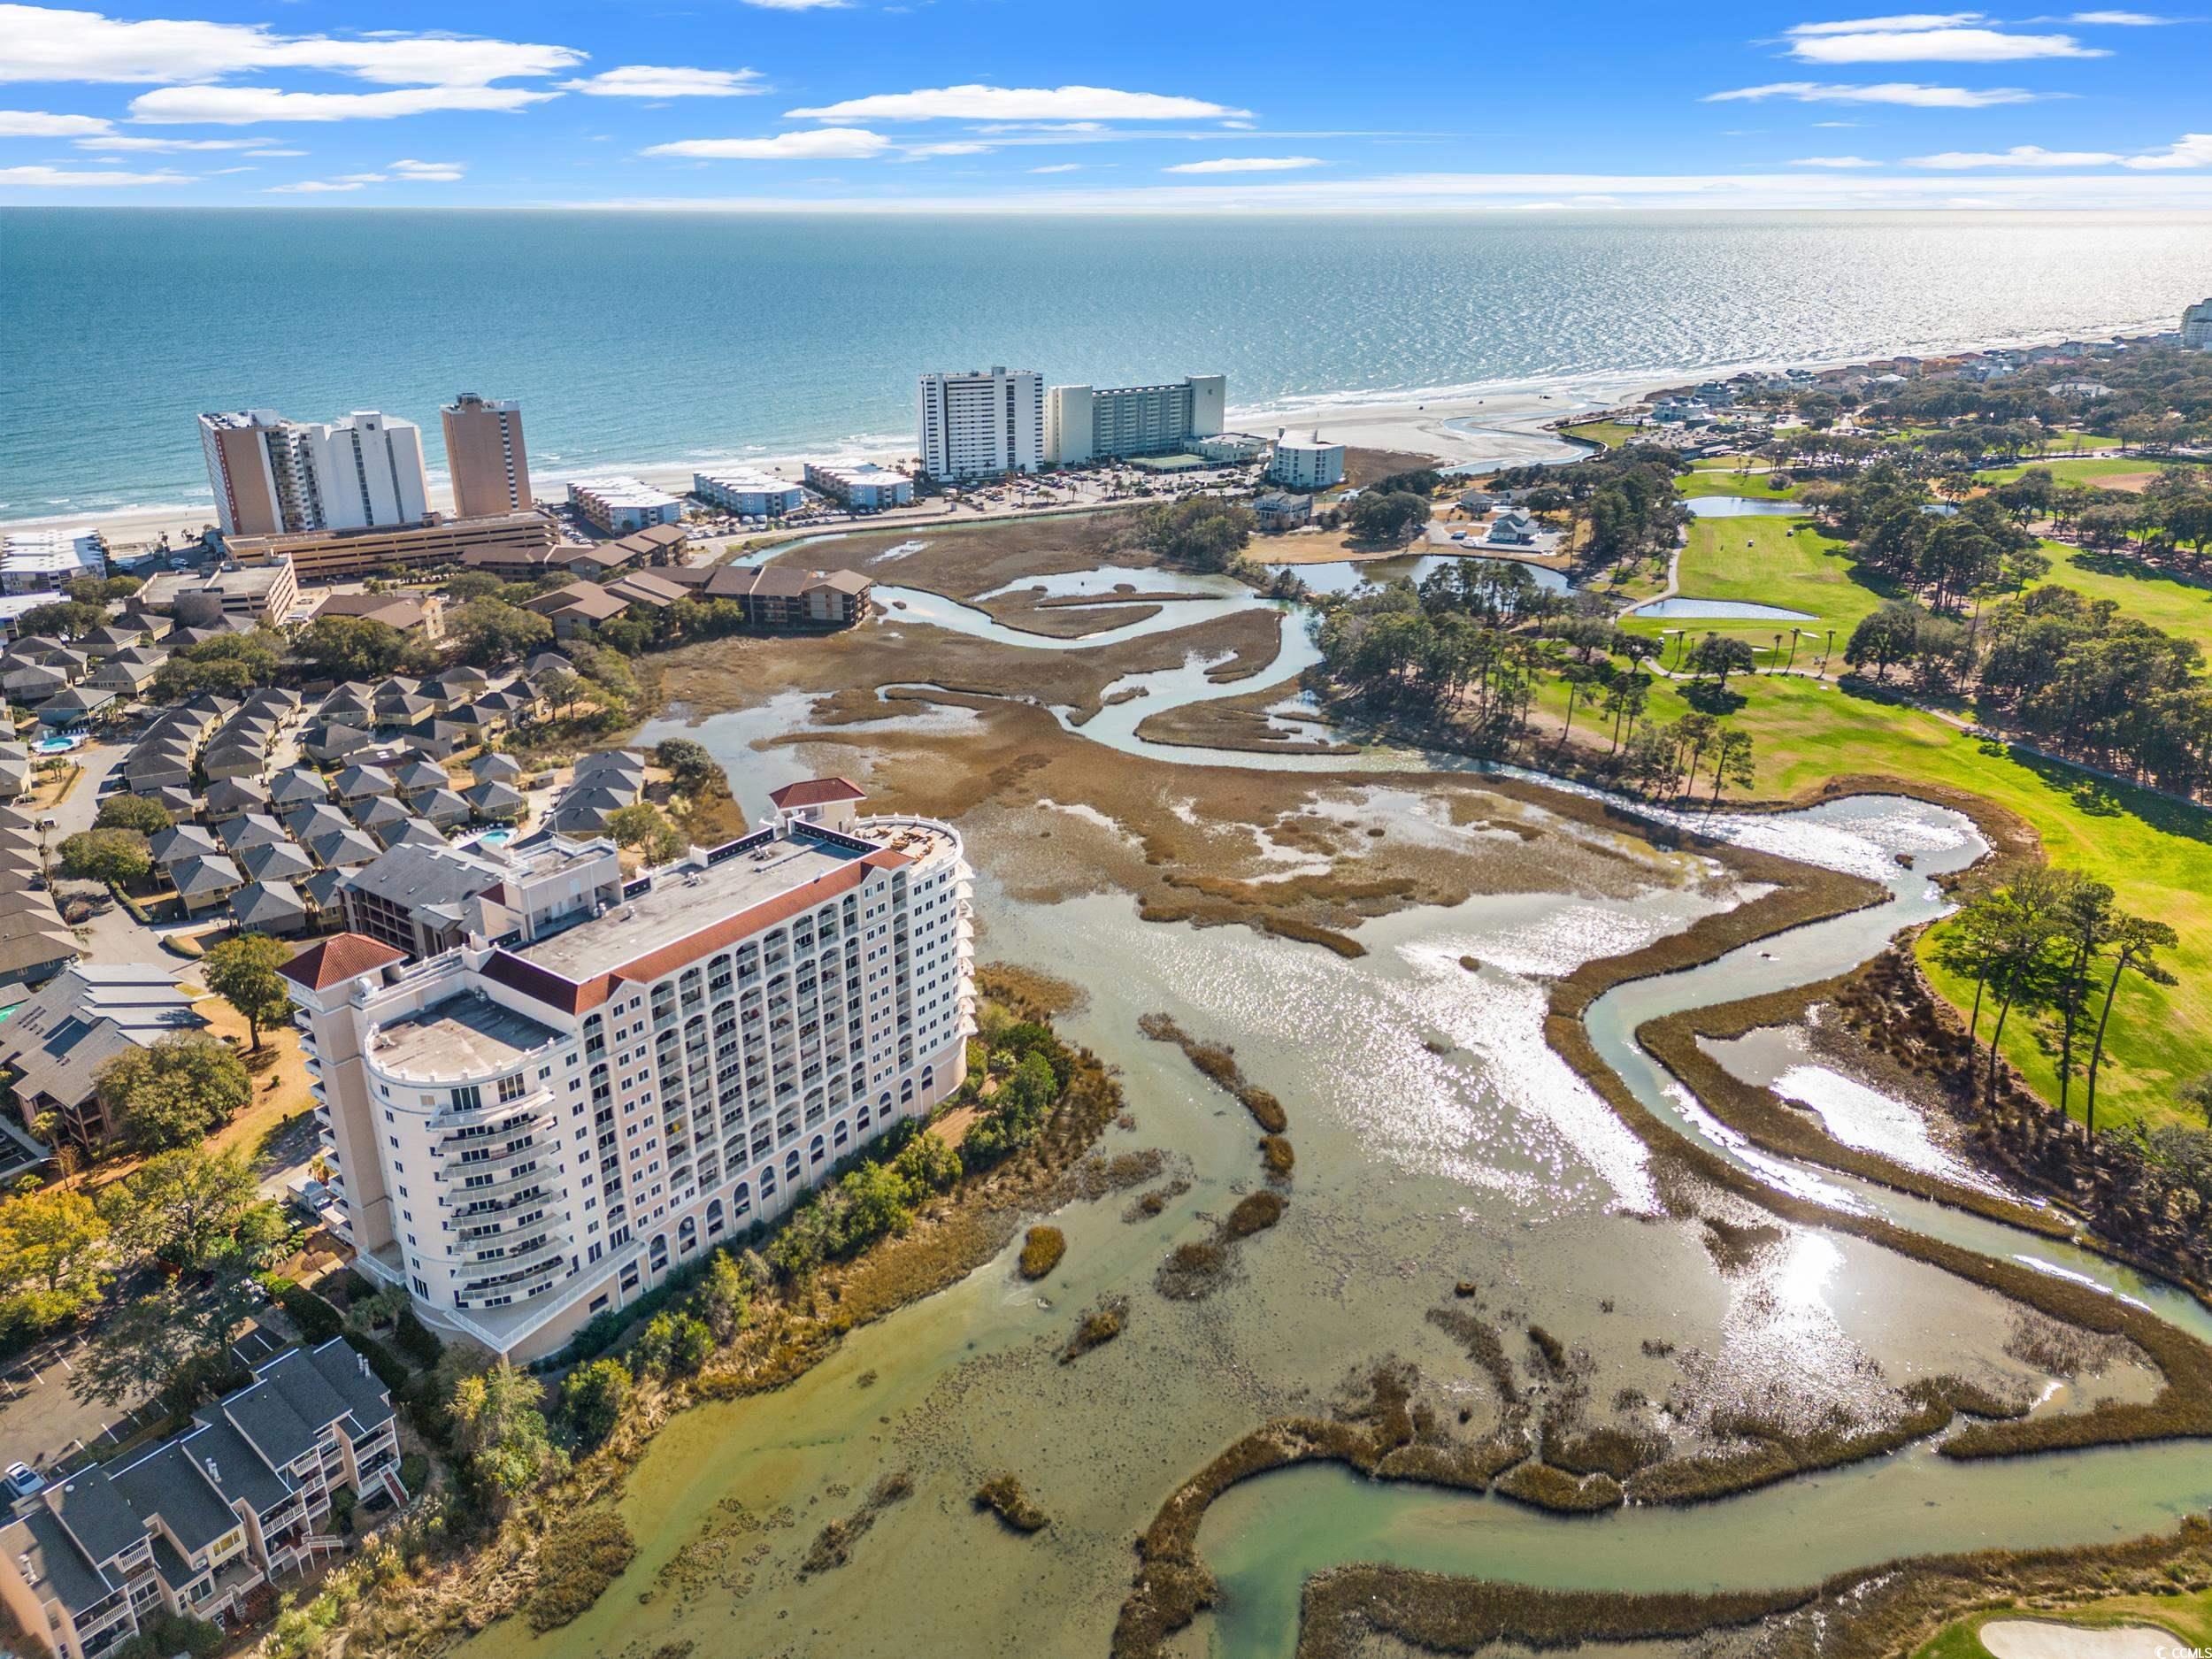 open house sunday from 2-4pm!! experience unparalleled luxury at the pointe in this meticulously maintained 3-bedroom, 3 1/2-bath condo overlooking the serene marsh and the dunes golf & beach club. revel in the opulence of this beautiful space featuring real hardwood flooring, freshly painted throughout.  there is no shortage of living space with an oversized living room that includes a wet bar and fireplace. indulge in culinary excellence in this stunning kitchen adorned with sleek granite countertops and equipped with top-of-the-line viking appliances. escape to lavish retreats within these luxurious bedrooms, two of the bedrooms boast a private balcony that opens up to breathtaking views of the tranquil marsh. these serene spaces are complemented by their own en-suite bathrooms, offering an indulgent oasis of comfort and privacy. the third bedroom features a custom built-in, perfect for a home office. enjoy exclusive amenities including the roof top deck with views of the atlantic ocean, indoor pool & spa, fitness center, an owners lounge, enjoy the convenience of golf cart parking, the pointe truly offers a lifestyle of elegance and sophistication. the hoa fees include all utilities including the gas for the fireplace and viking gas stove, minus the electric in the condo. welcome to your refined retreat where every detail has been thoughtfully curated for the utmost comfort and style. schedule your private tour today!